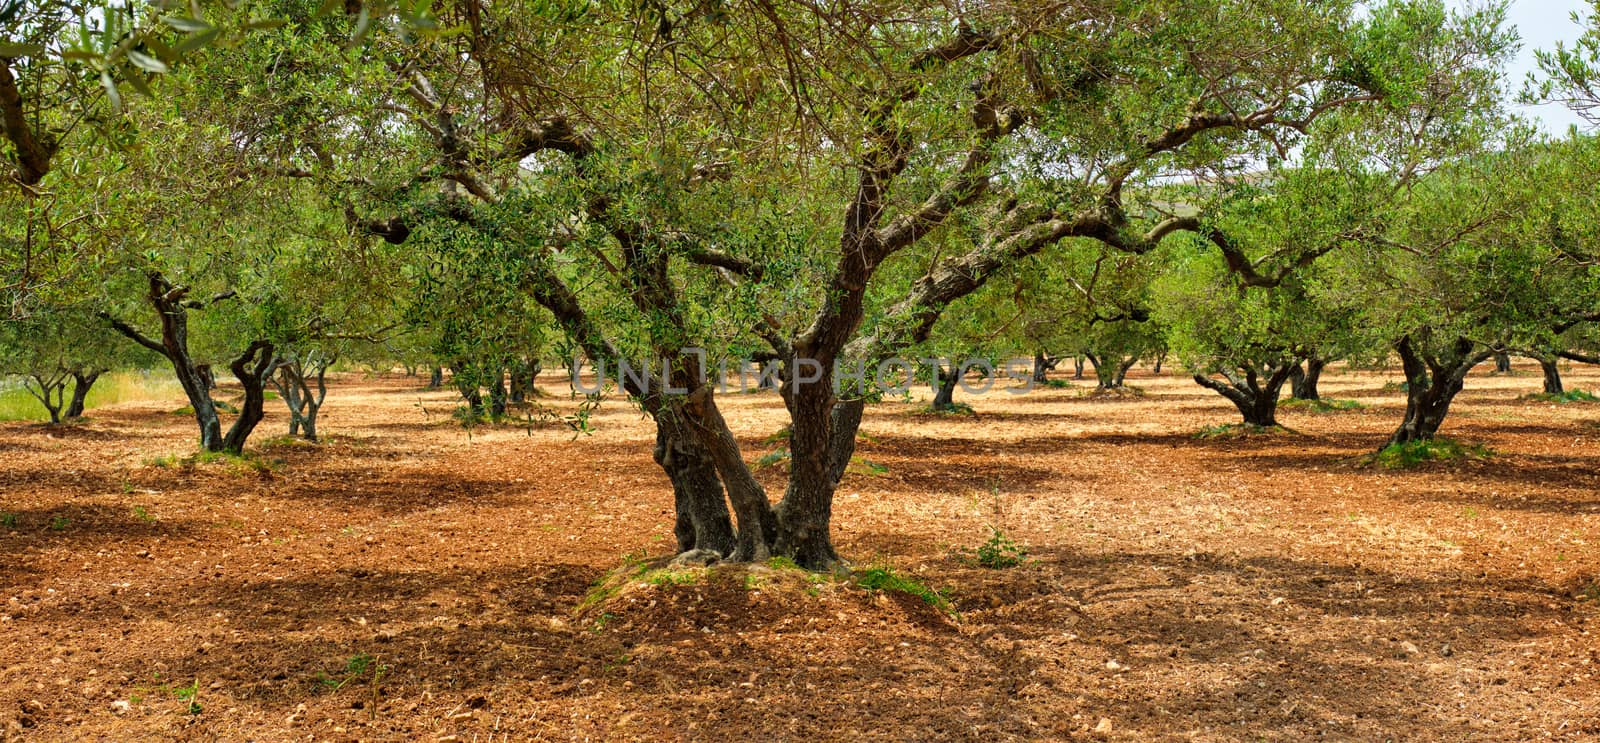 Olive trees Olea europaea in Crete, Greece for olive oil production by dimol